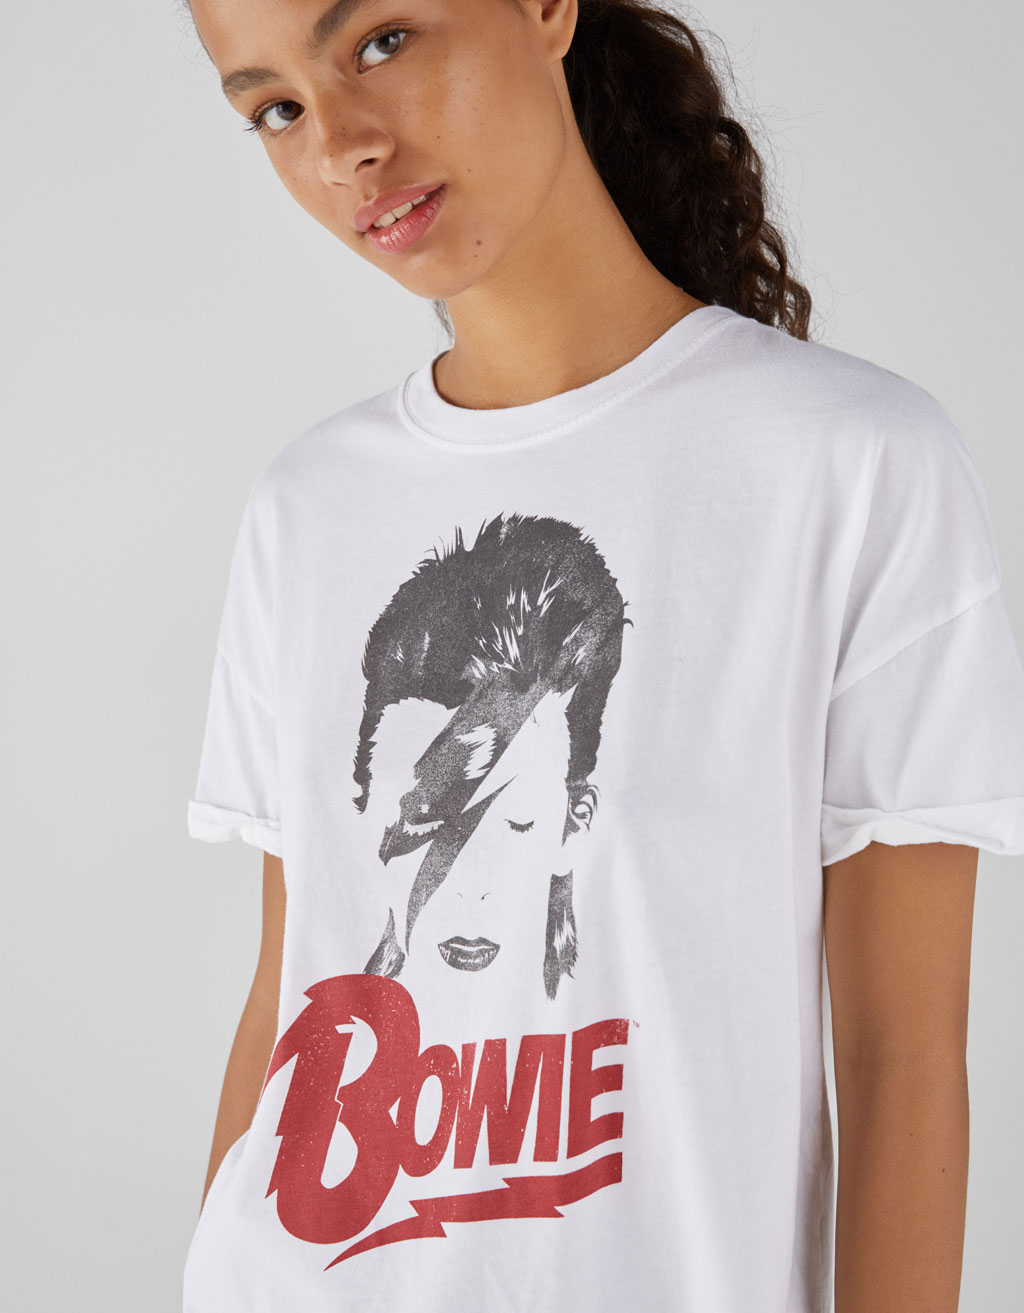 Pay Full Price for Bowie